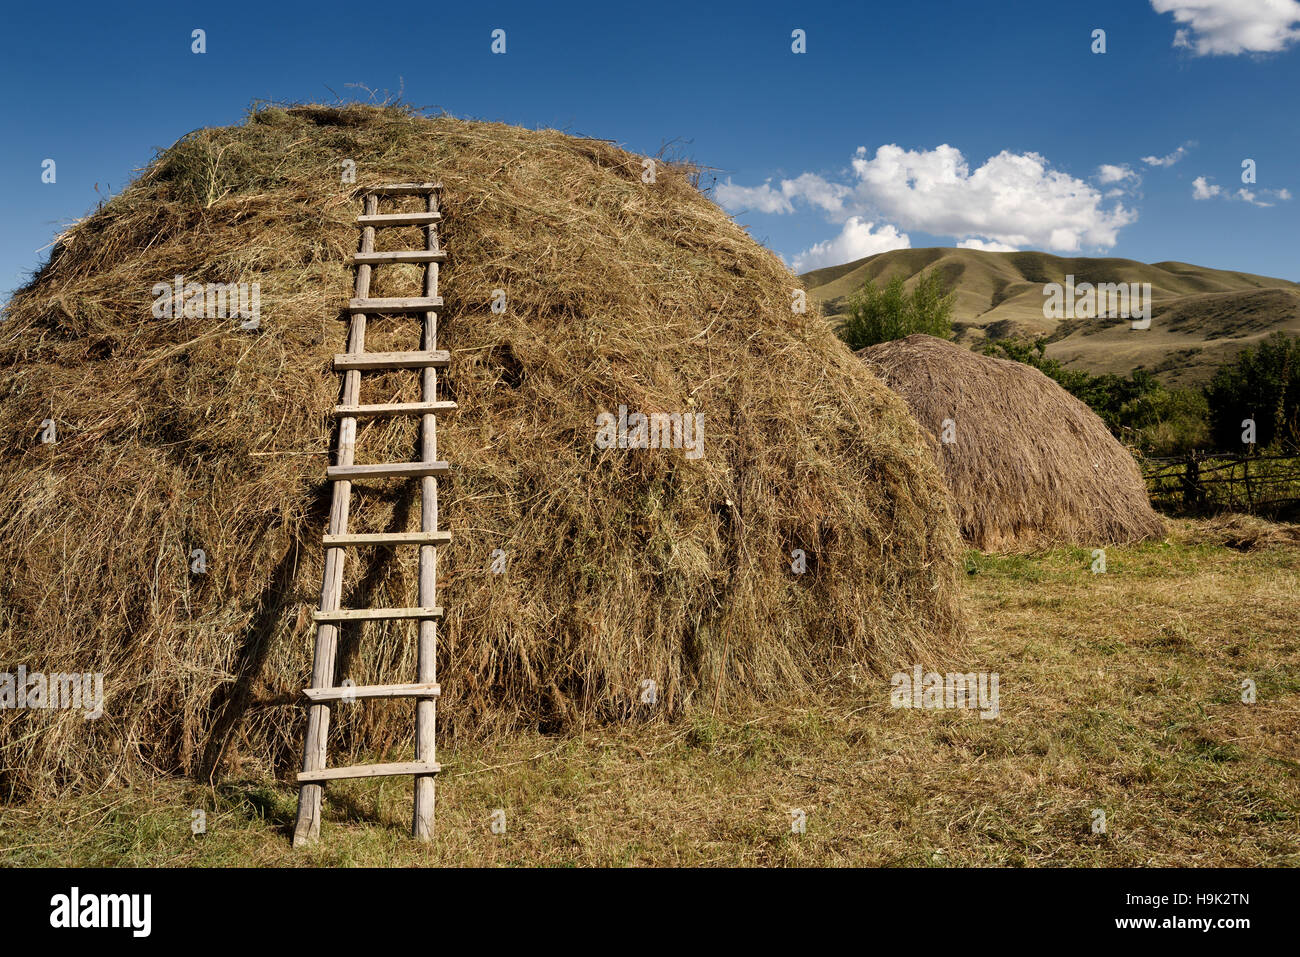 Hay stack with ladder in rural village of Saty on the Chilik river Kazakhstan Stock Photo